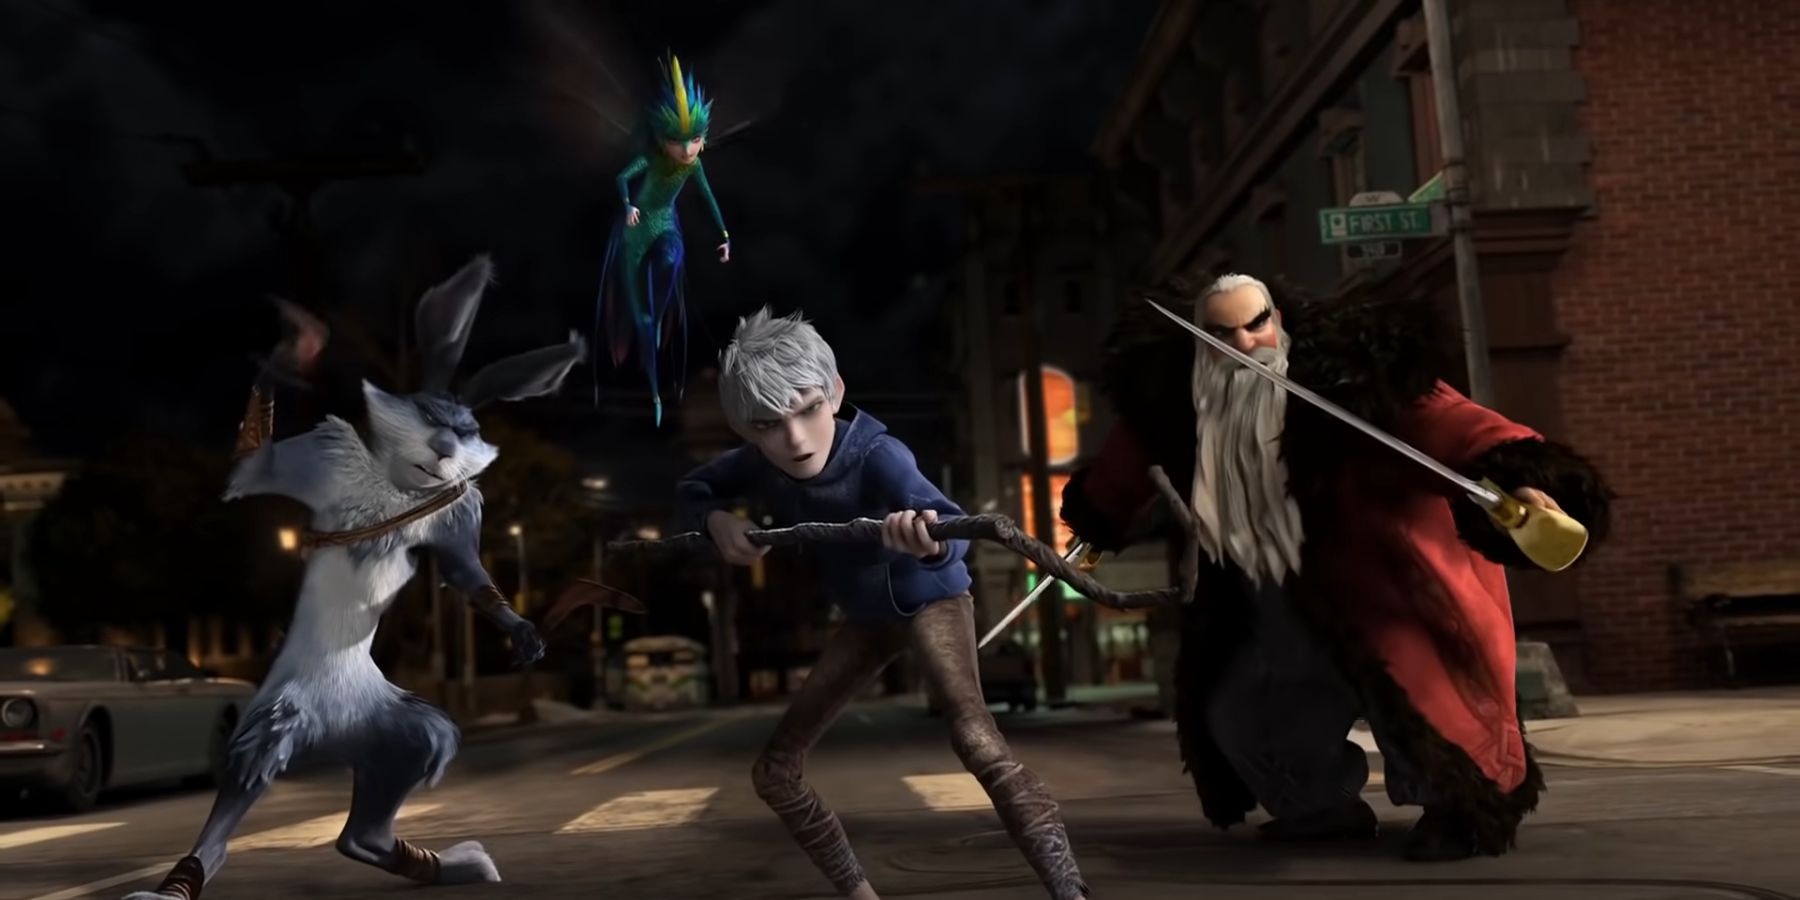 The Guardians united to fight Pitch Black in Rise Of The Guardians